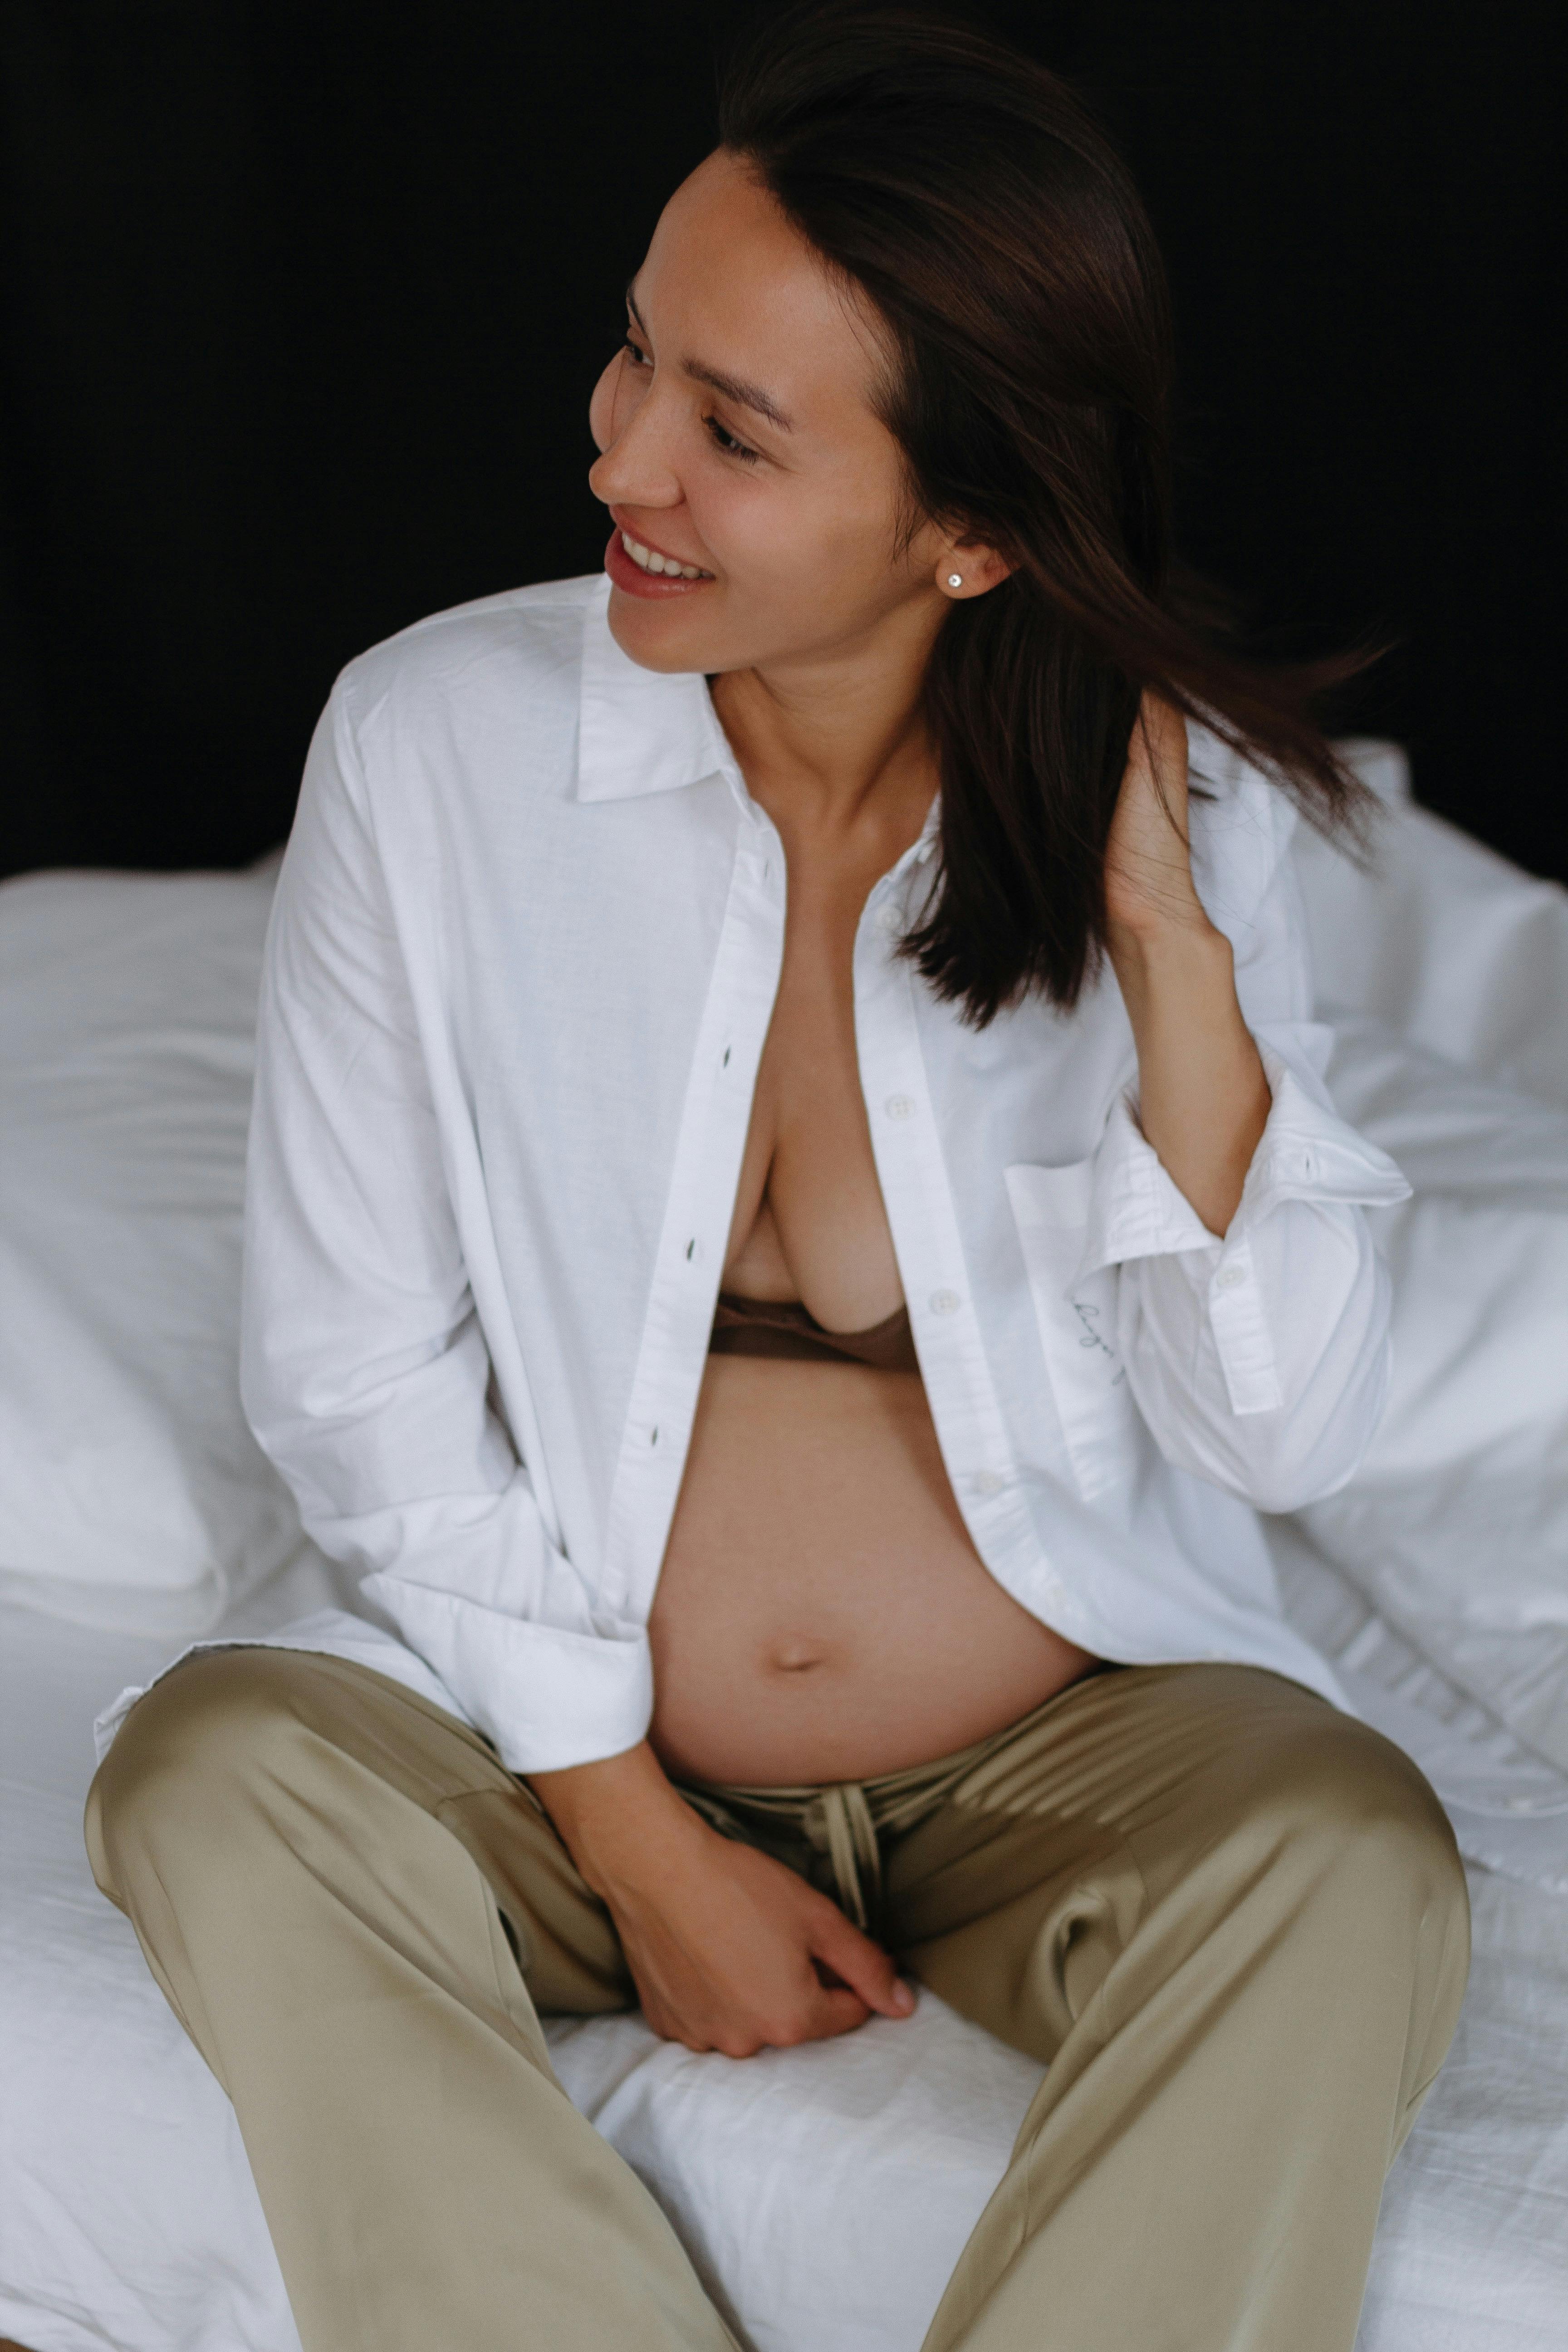 Beautiful Young Woman In White Undershirt Is Holding A Pregnancy